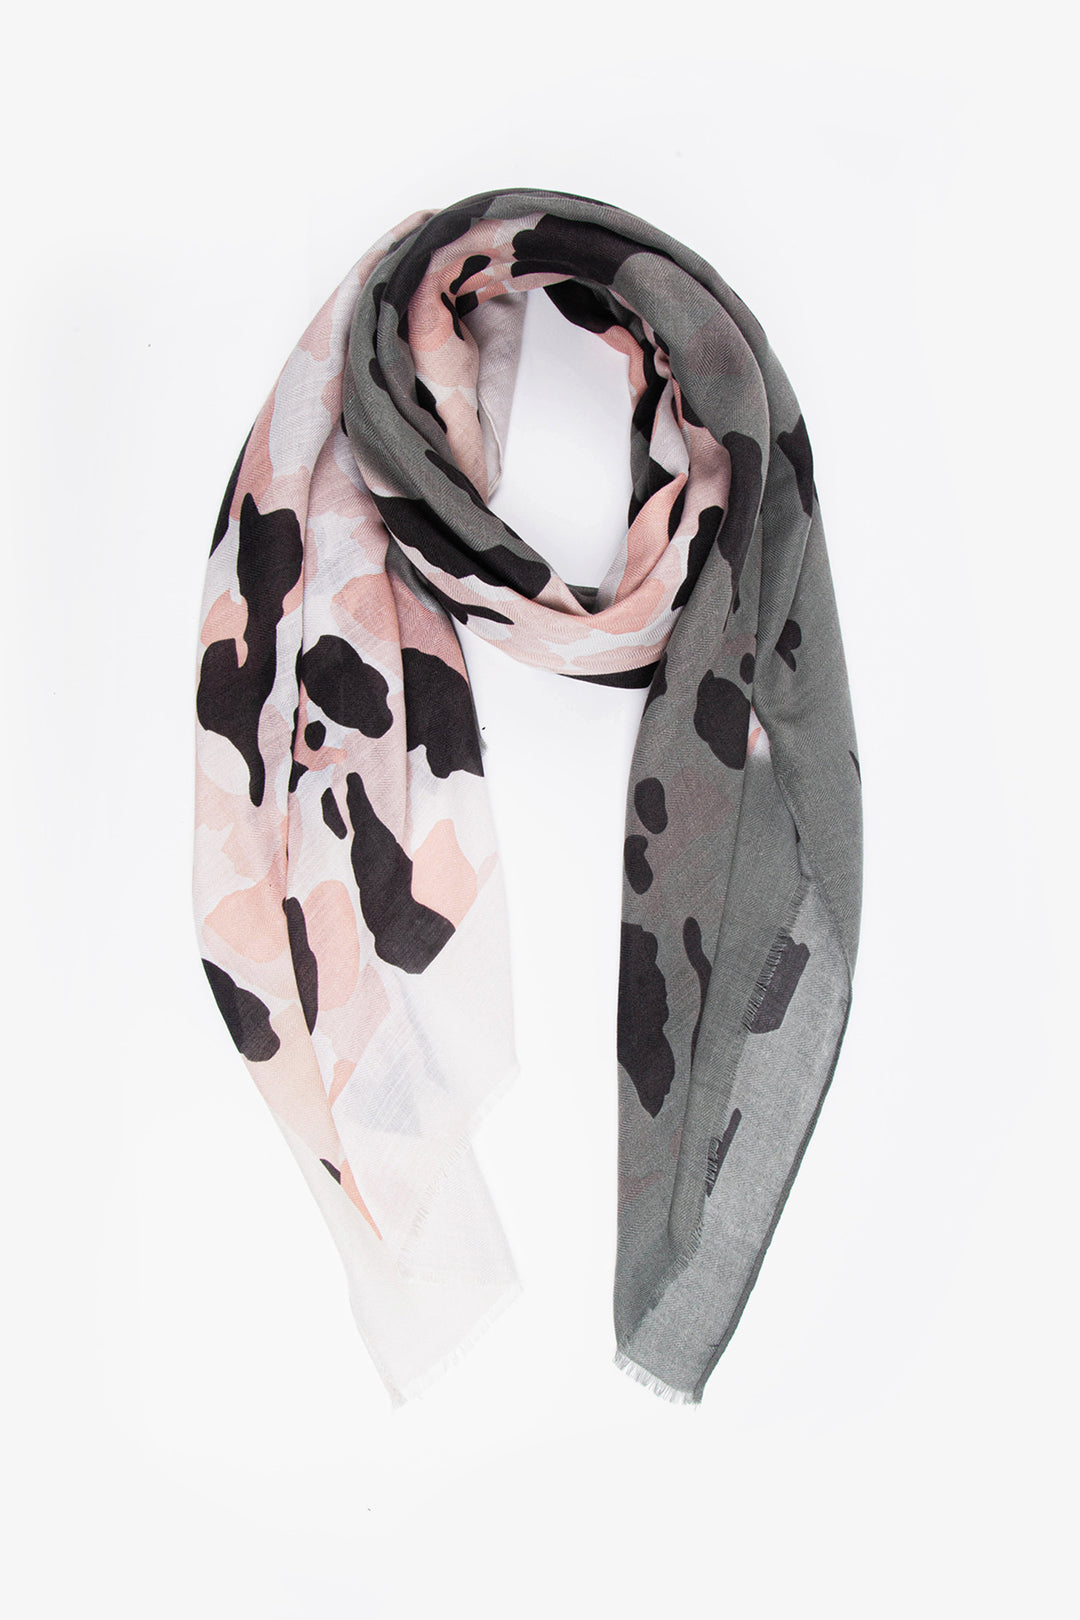 Leopard Print in Pastel Pink, Hot Pink and Fuchsia Scarf